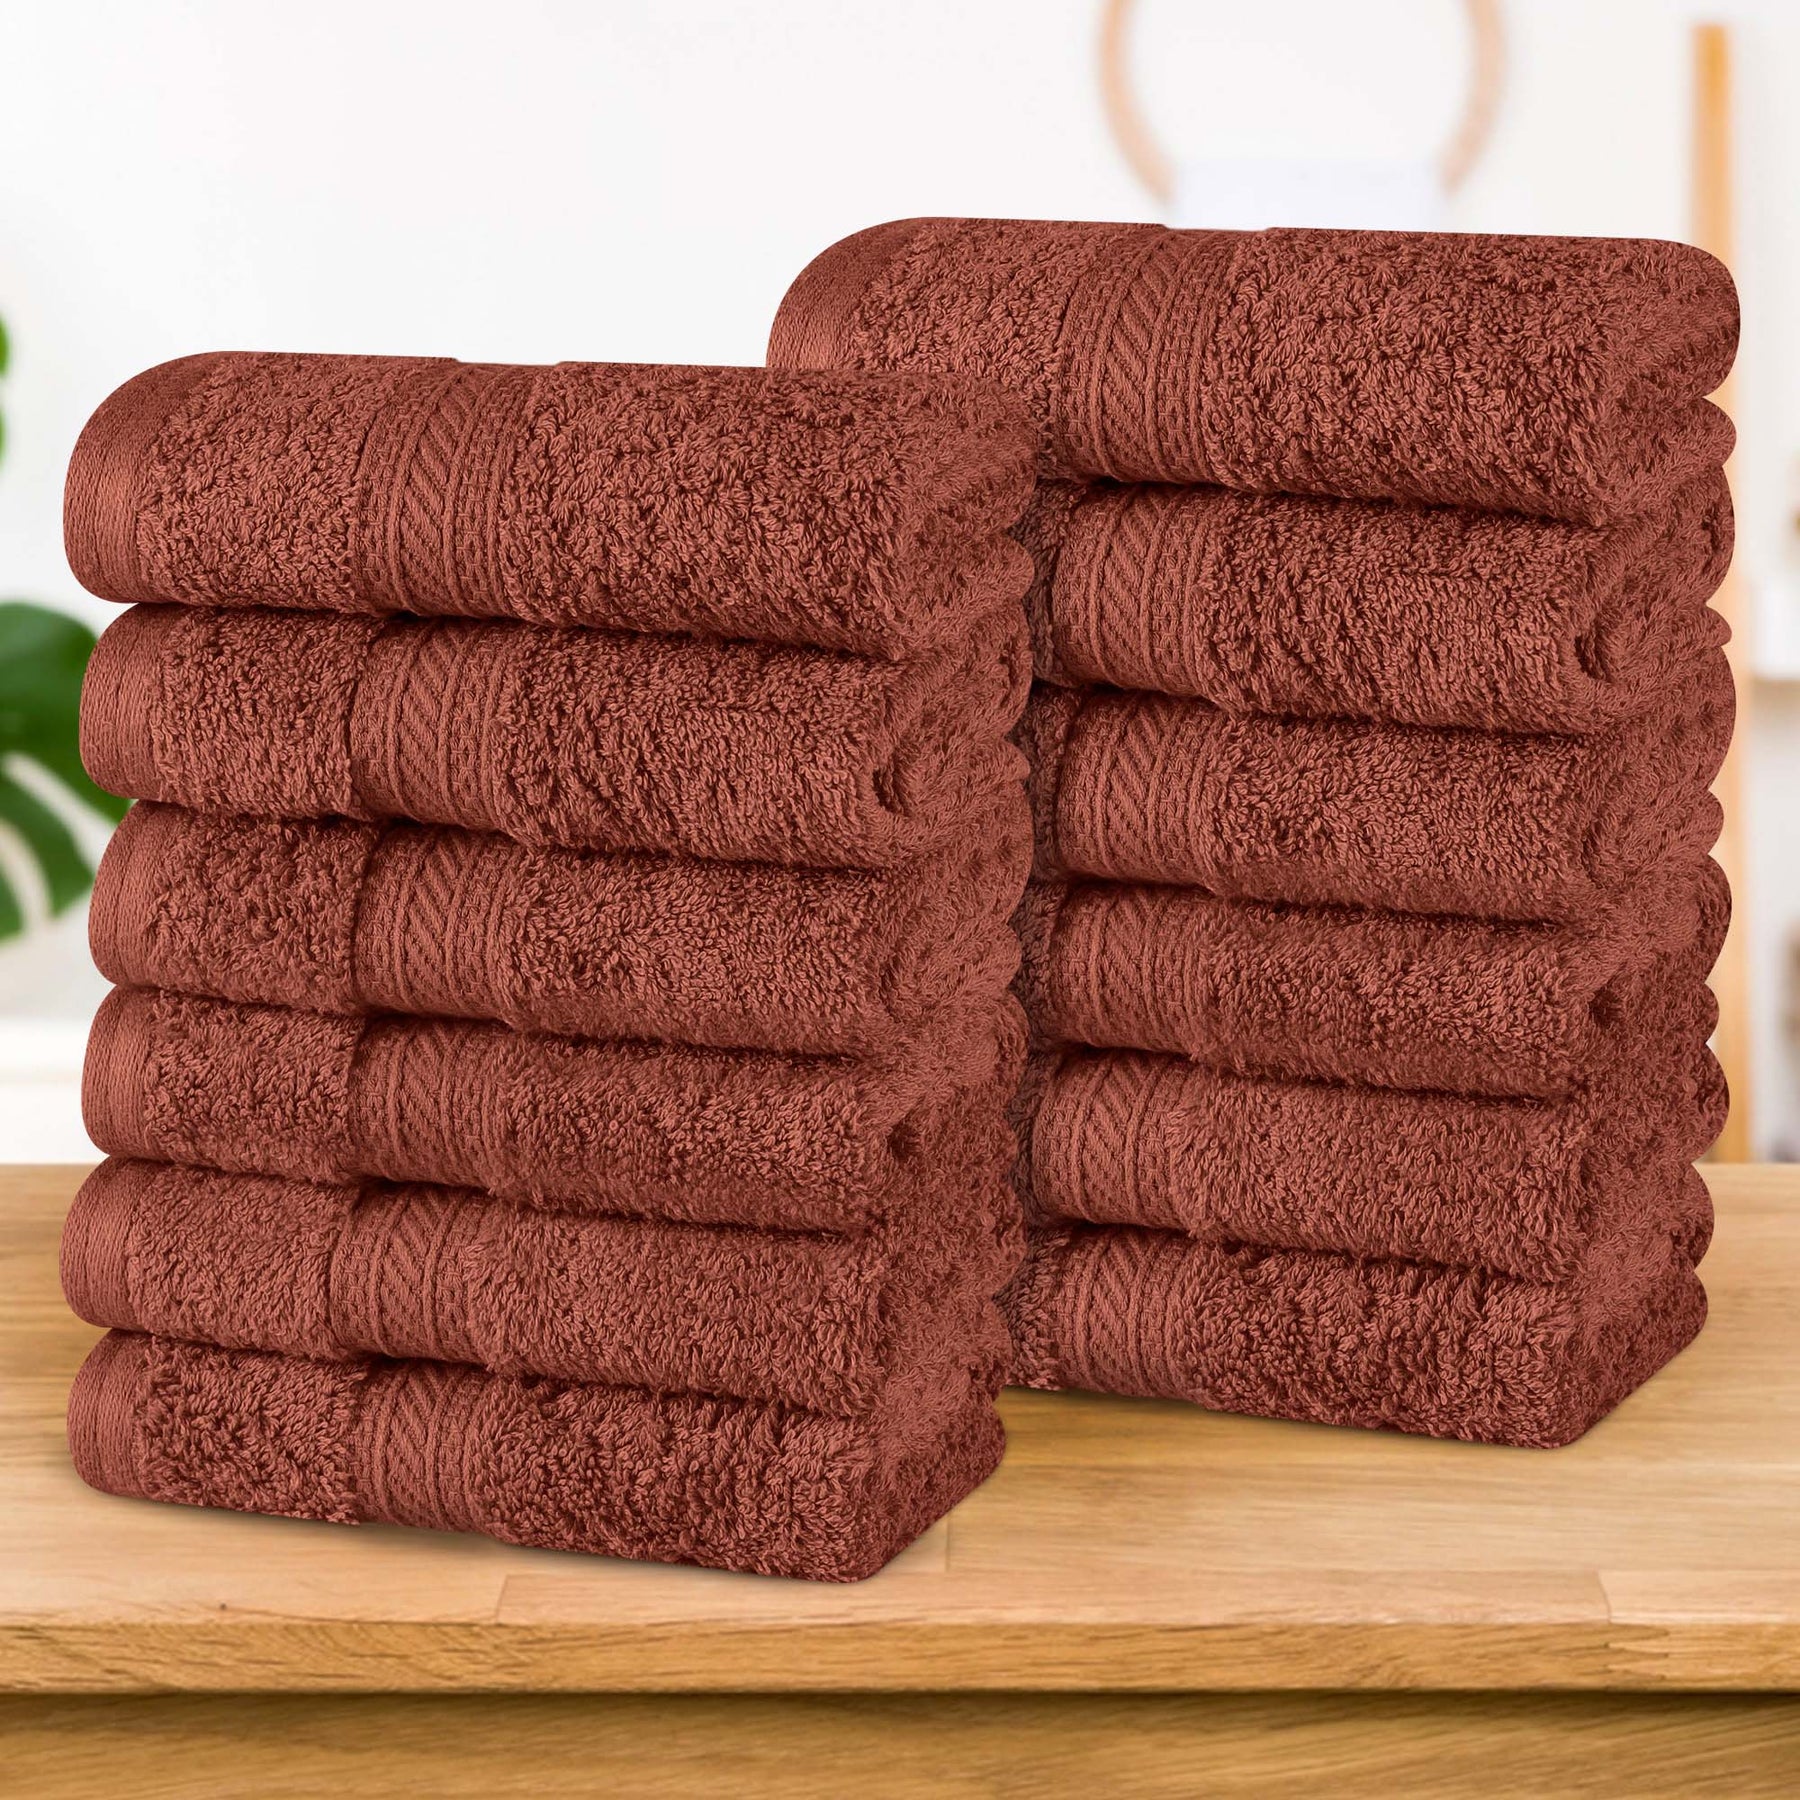 Atlas Combed Cotton Highly Absorbent Solid Face Towels / Washcloths - Hot Chocolate